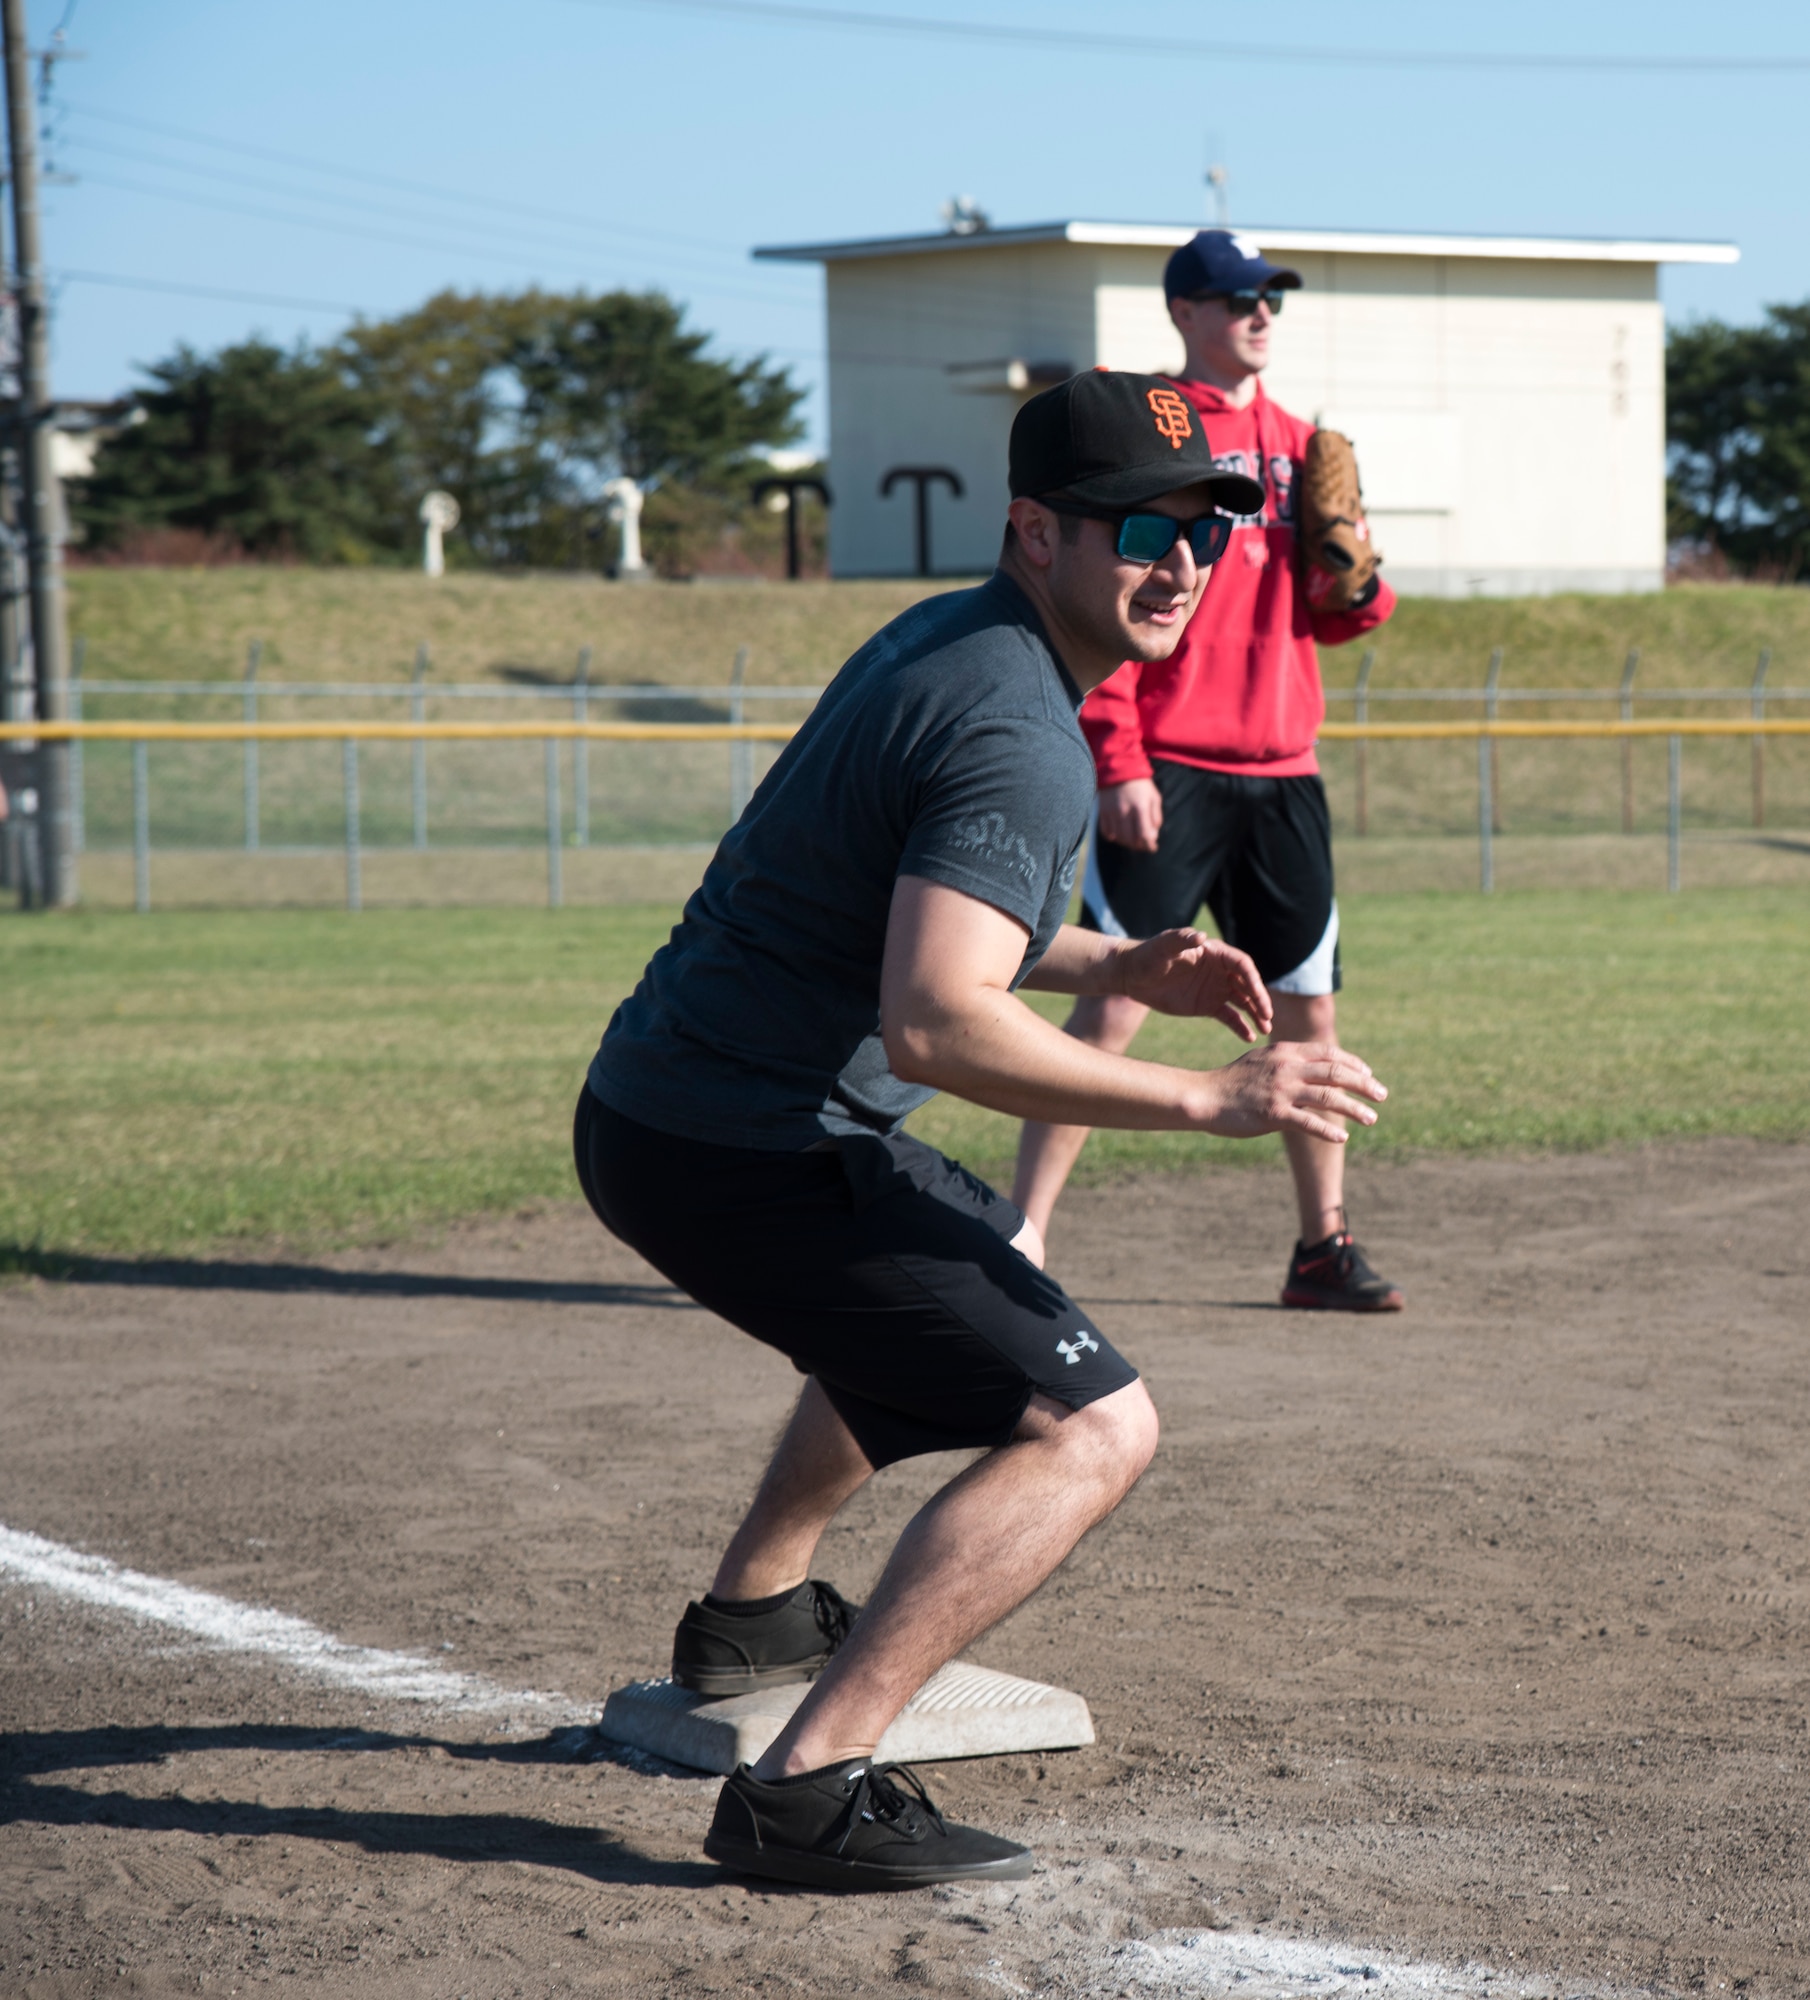 U.S. Air Force Staff Sgt. Gregoriorafael Rodriguez, a 35th Security Forces Squadron trainer, prepares to run to home plate during the 2019 Cinco de Mayo softball tournament at Misawa Air Base, Japan, May 4, 2019. More than 73 participants played in the event which provided a way for fellow service members, family and civilians to build camaraderie and meet new people. (U.S. Air Force photo by Branden Yamada)